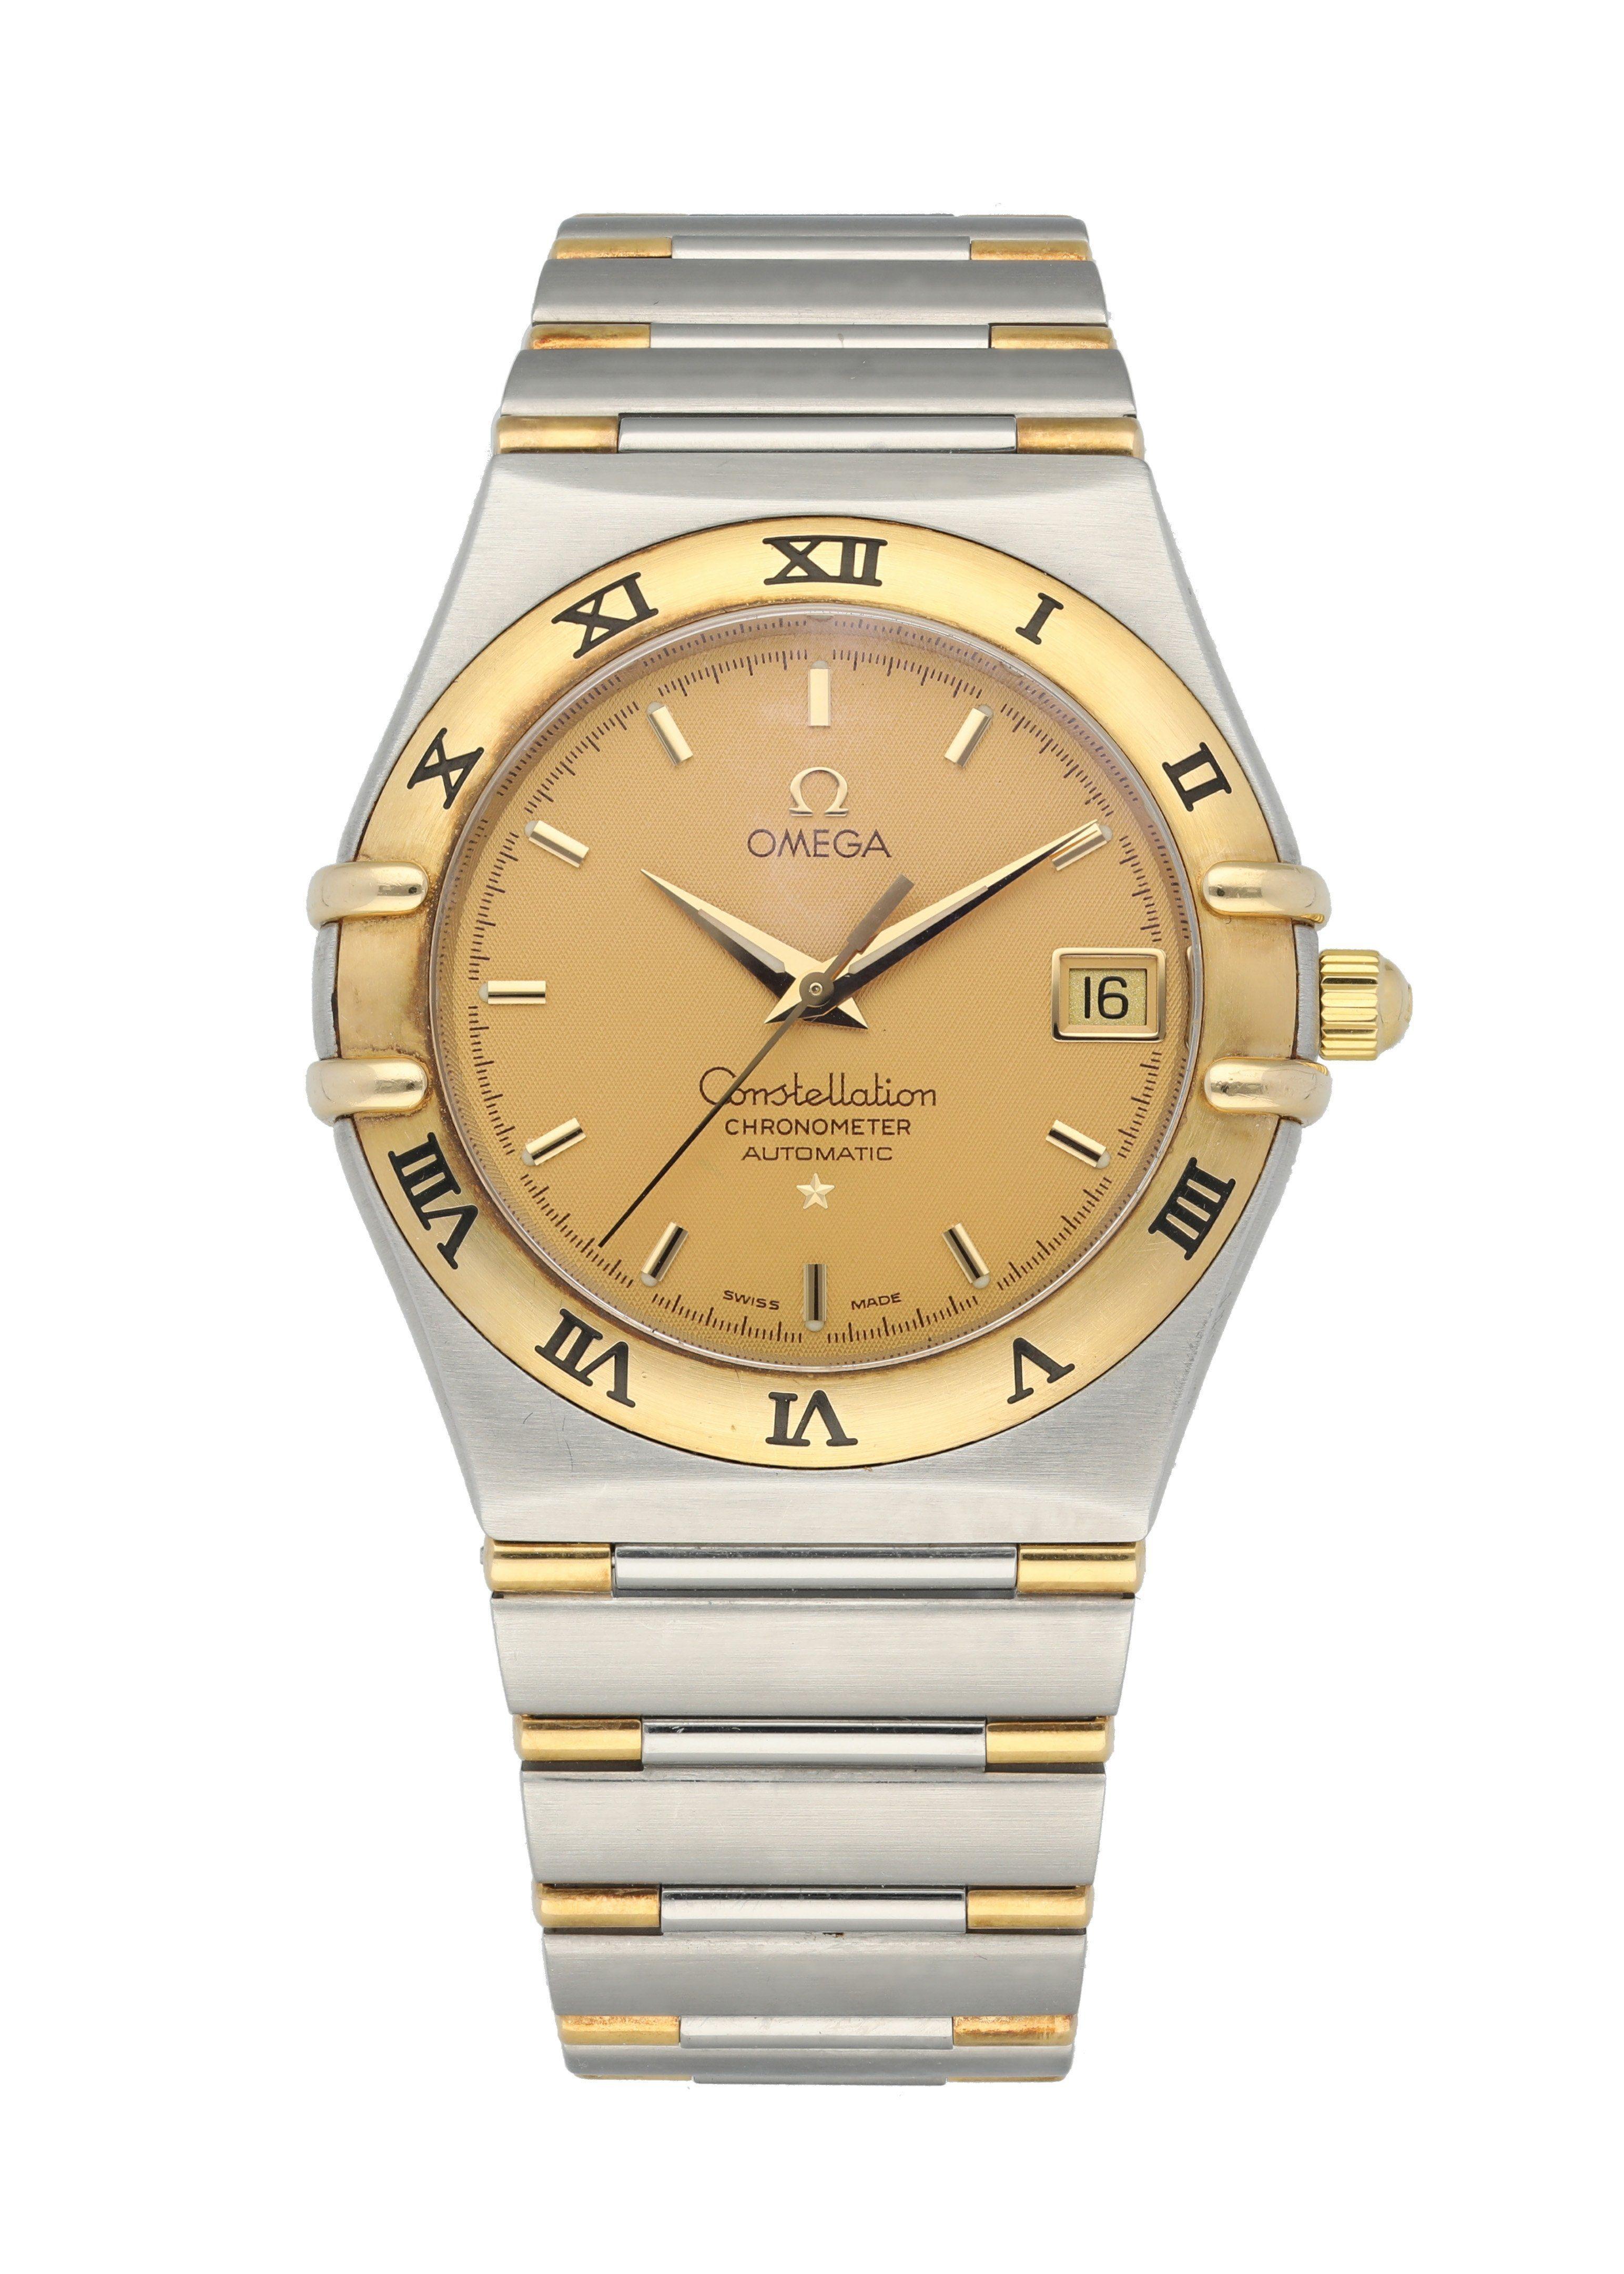 Omega Constellation 1302.10.00 Men's Watch. 
36mm Stainless Steel case. 
Yellow Gold Stationary bezel. 
Champagne dial with gold hands and index hour markers. 
Minute markers on the outer dial. 
Date display at the 3 o'clock position. 
Stainless